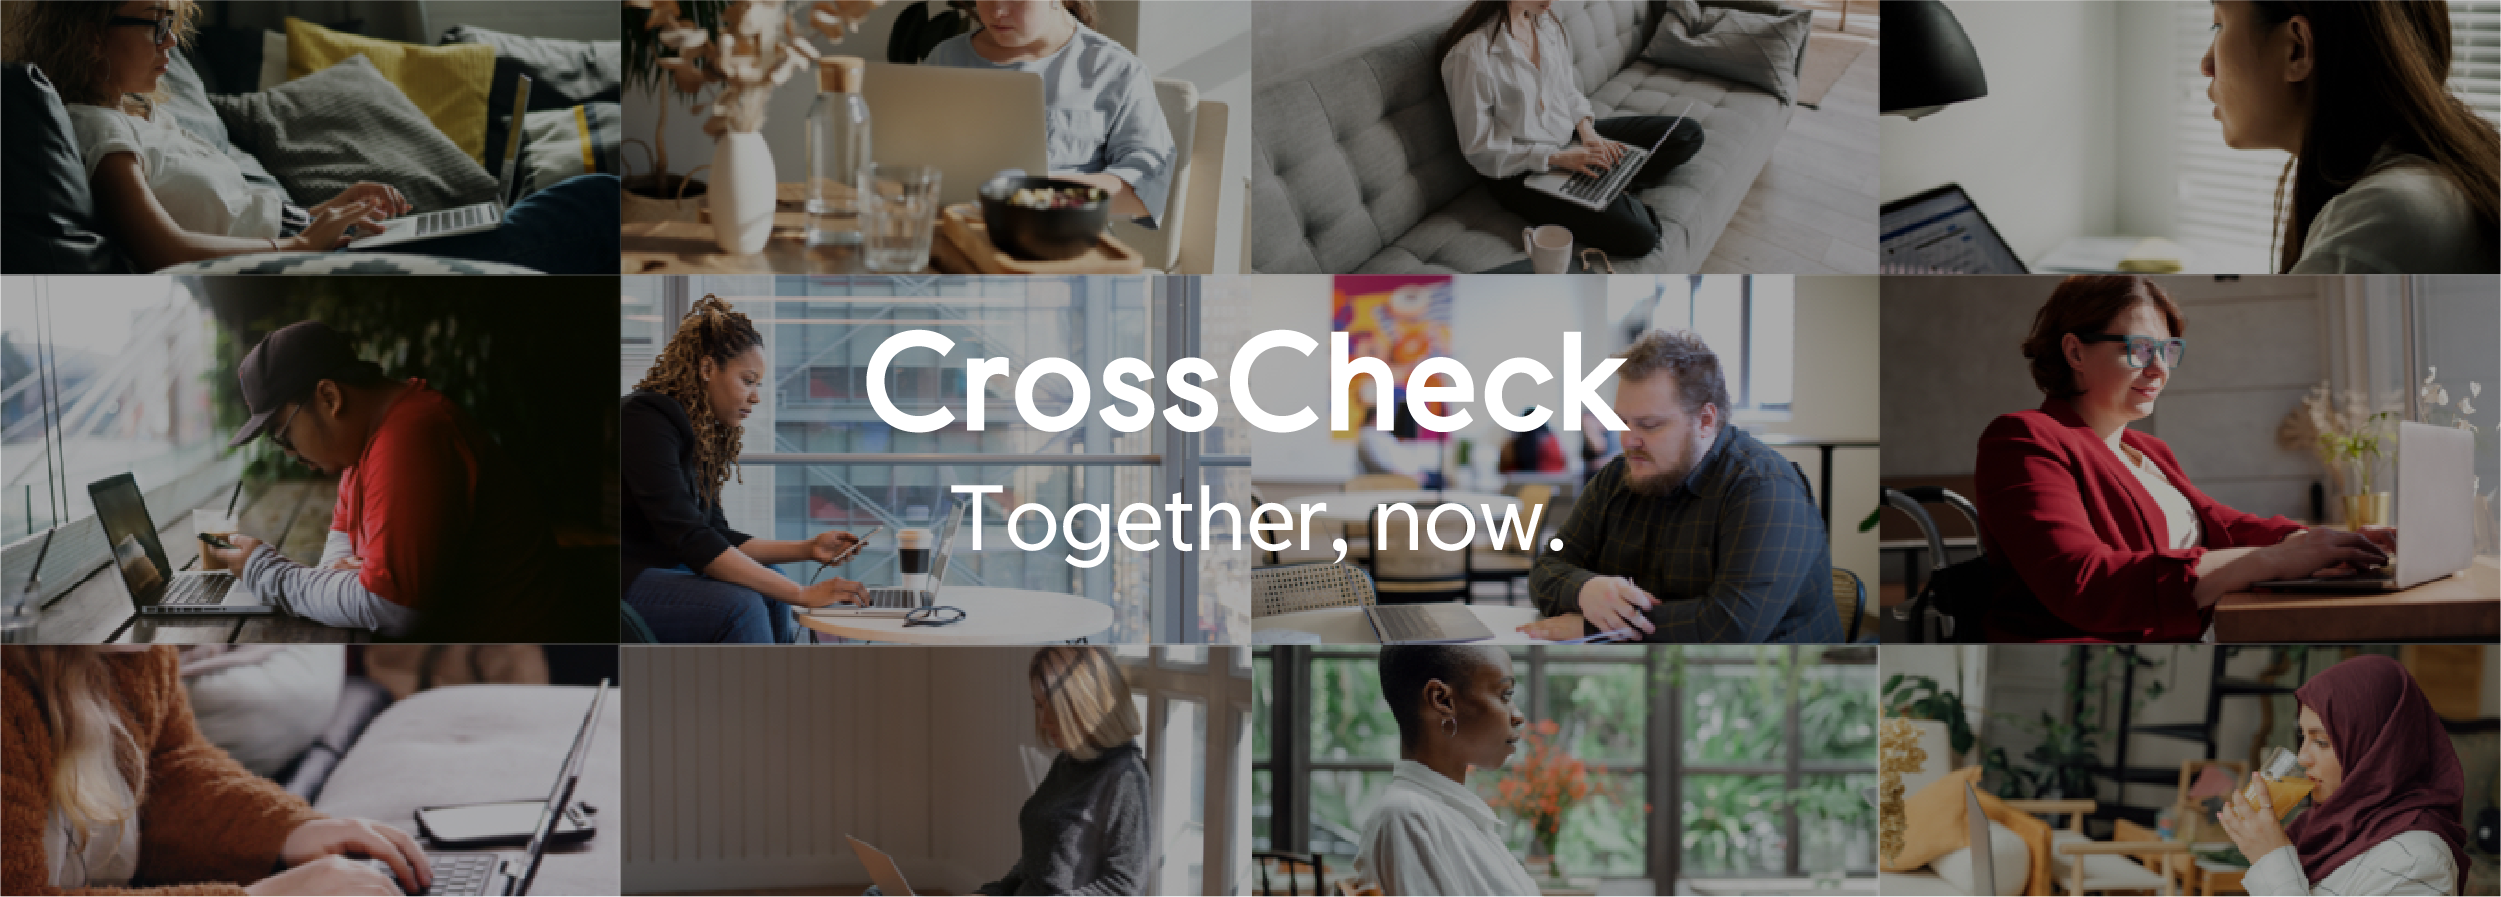 CrossCheck: Together, Now. - First Draft